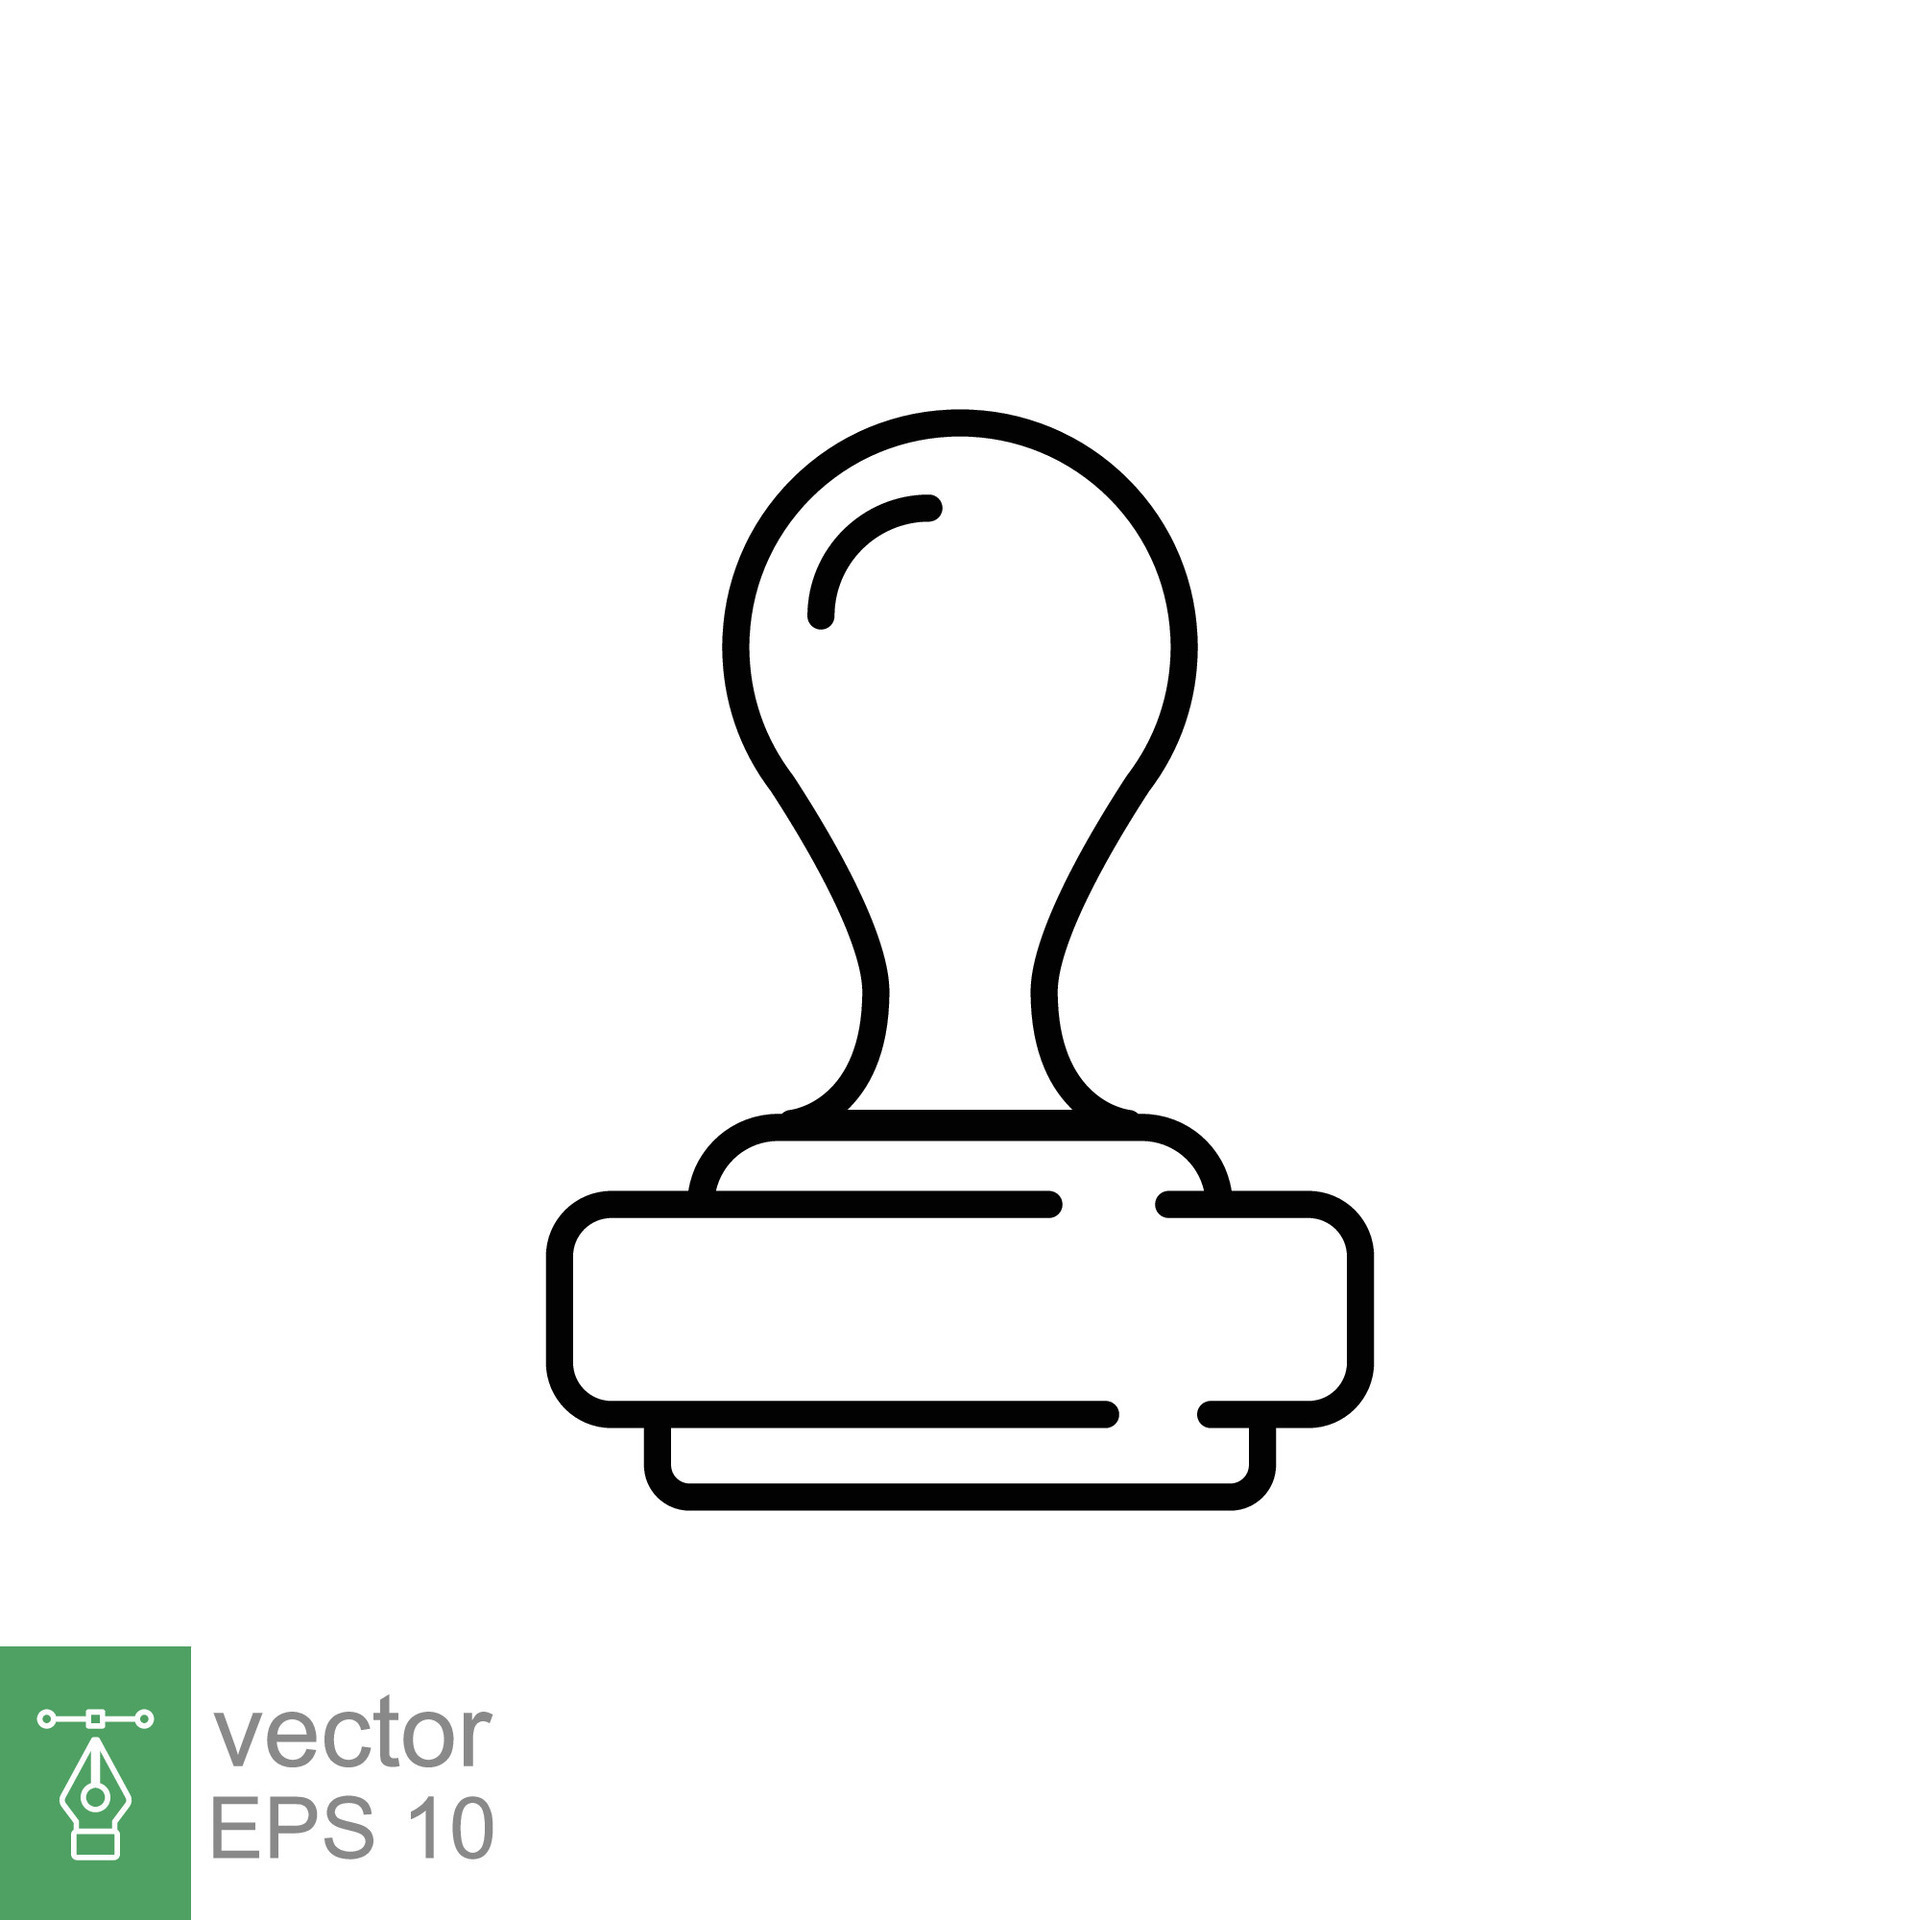 Rubber stamp icon. Simple outline style. Seal, stamper, approval